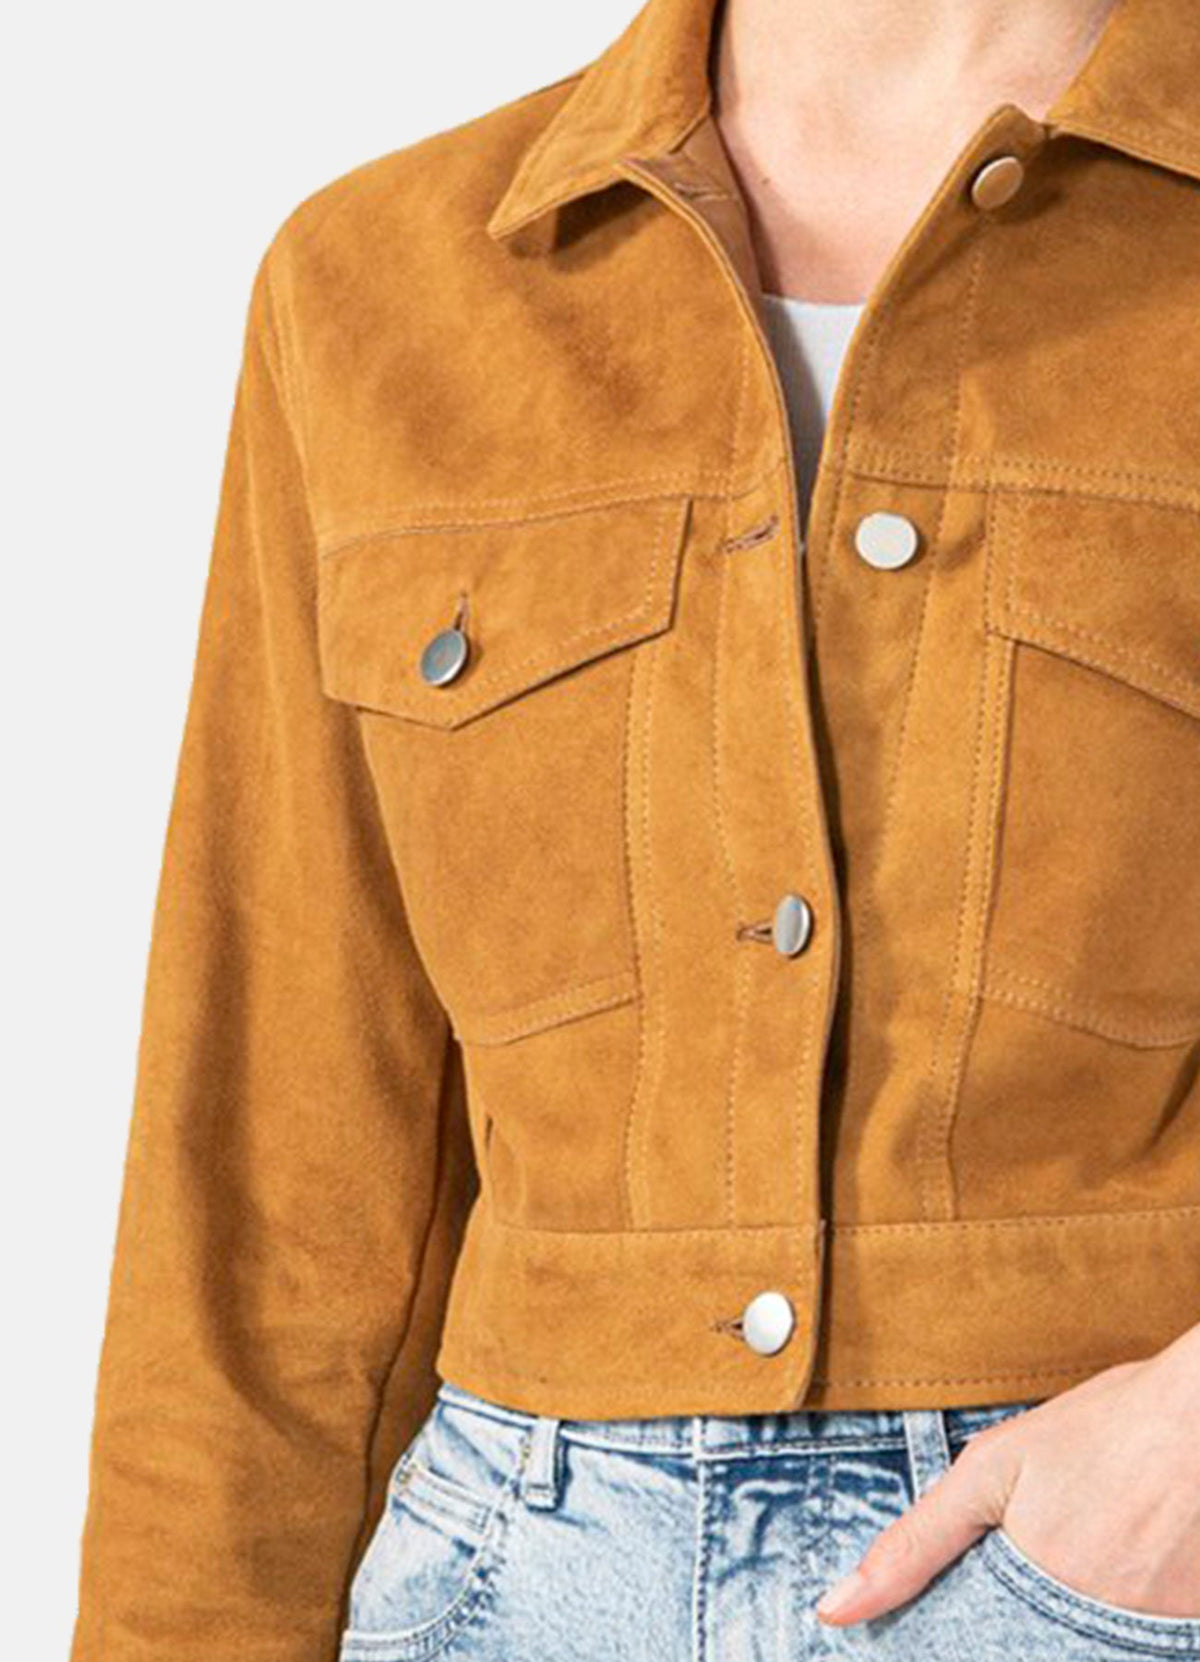 Womens TAN Denim Style Suede Leather Jacket